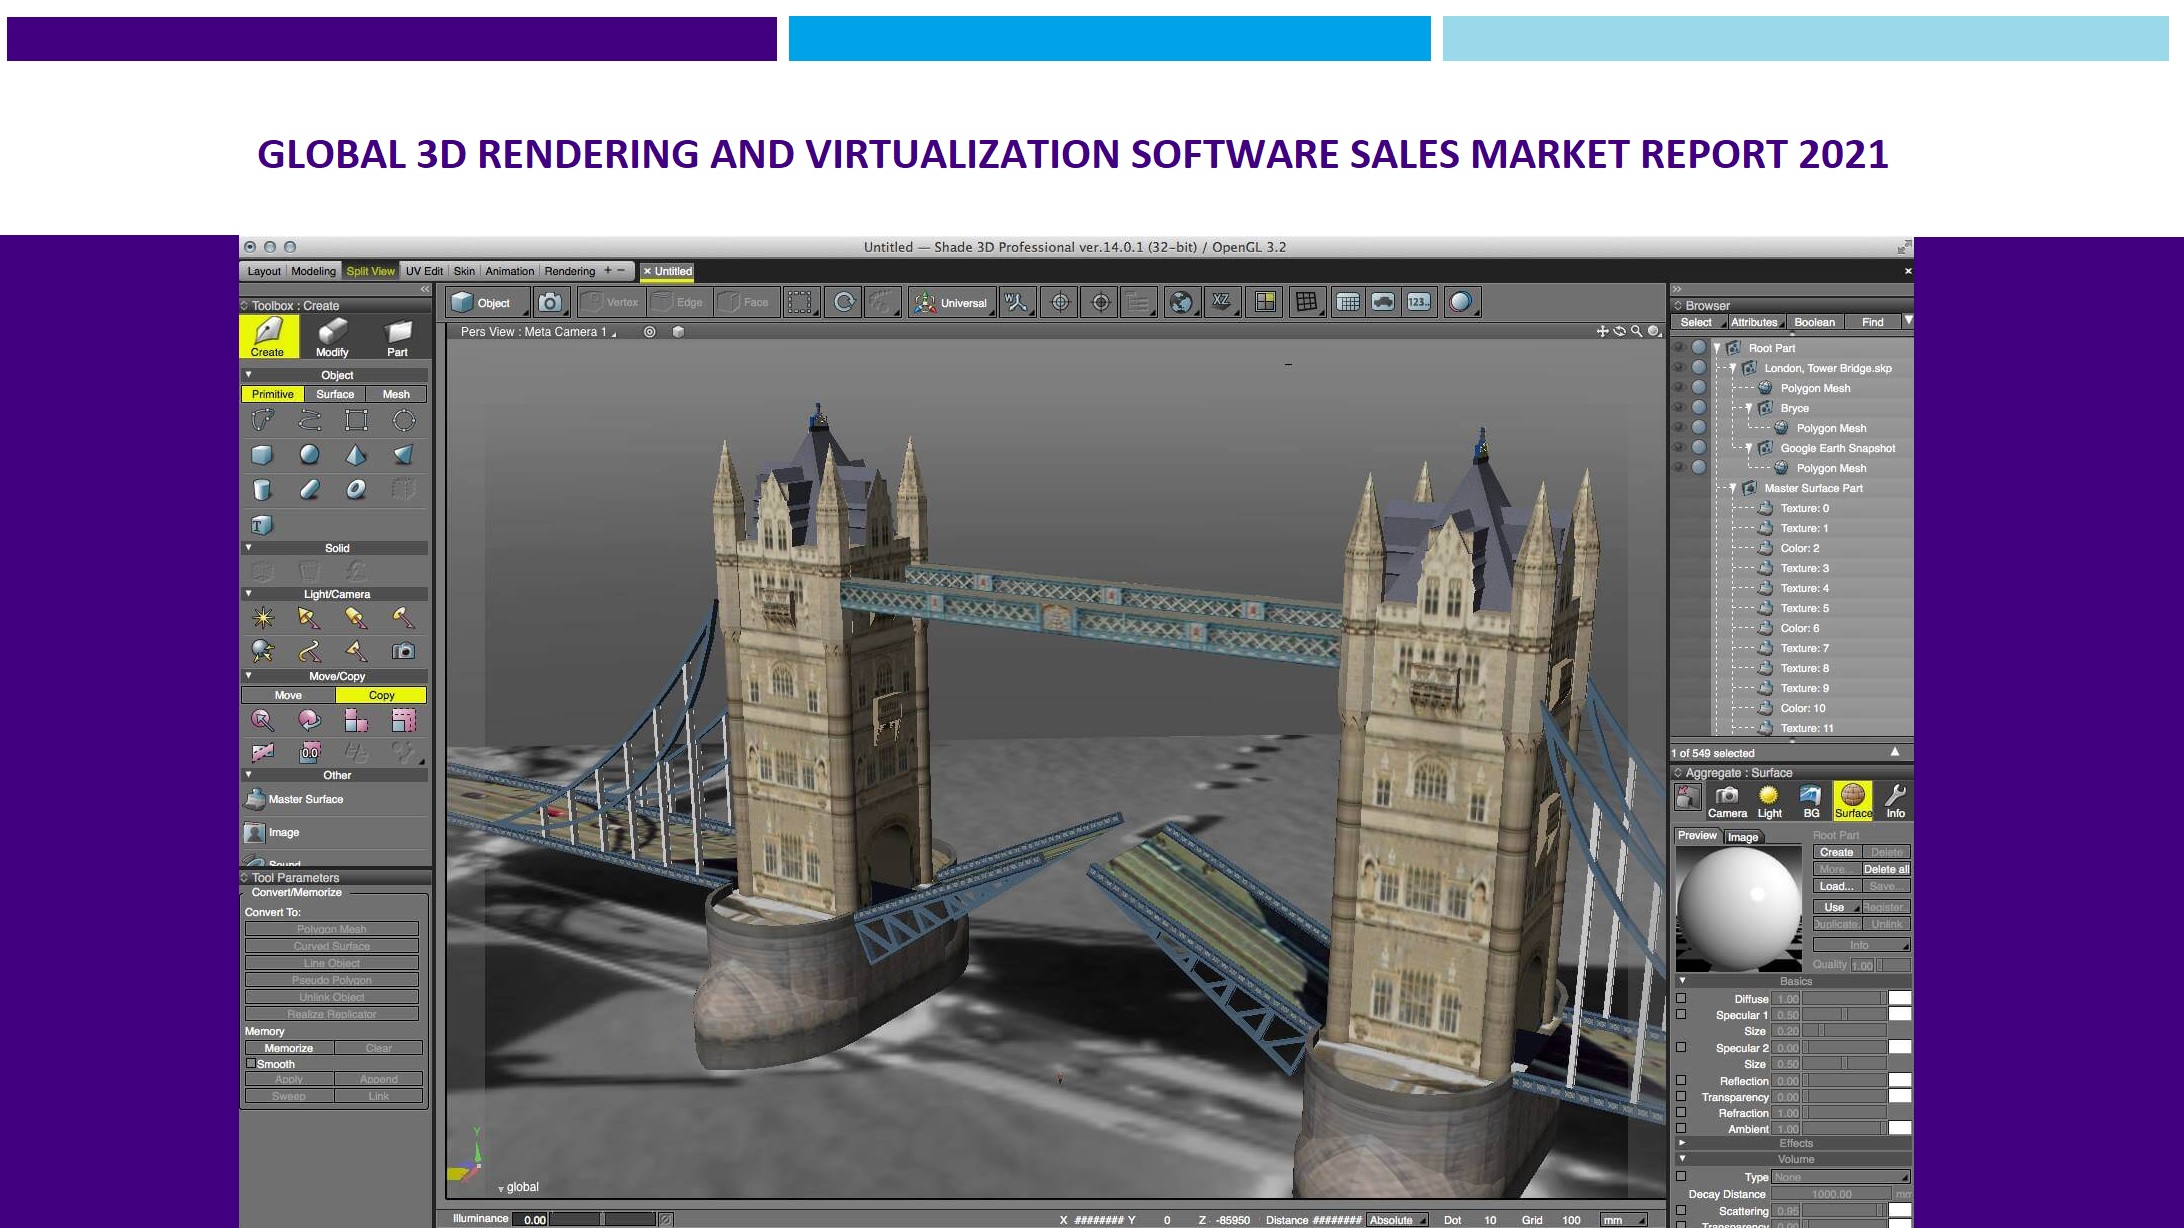 Global 3D Rendering and Virtualization Software Sales Market Report 2021.